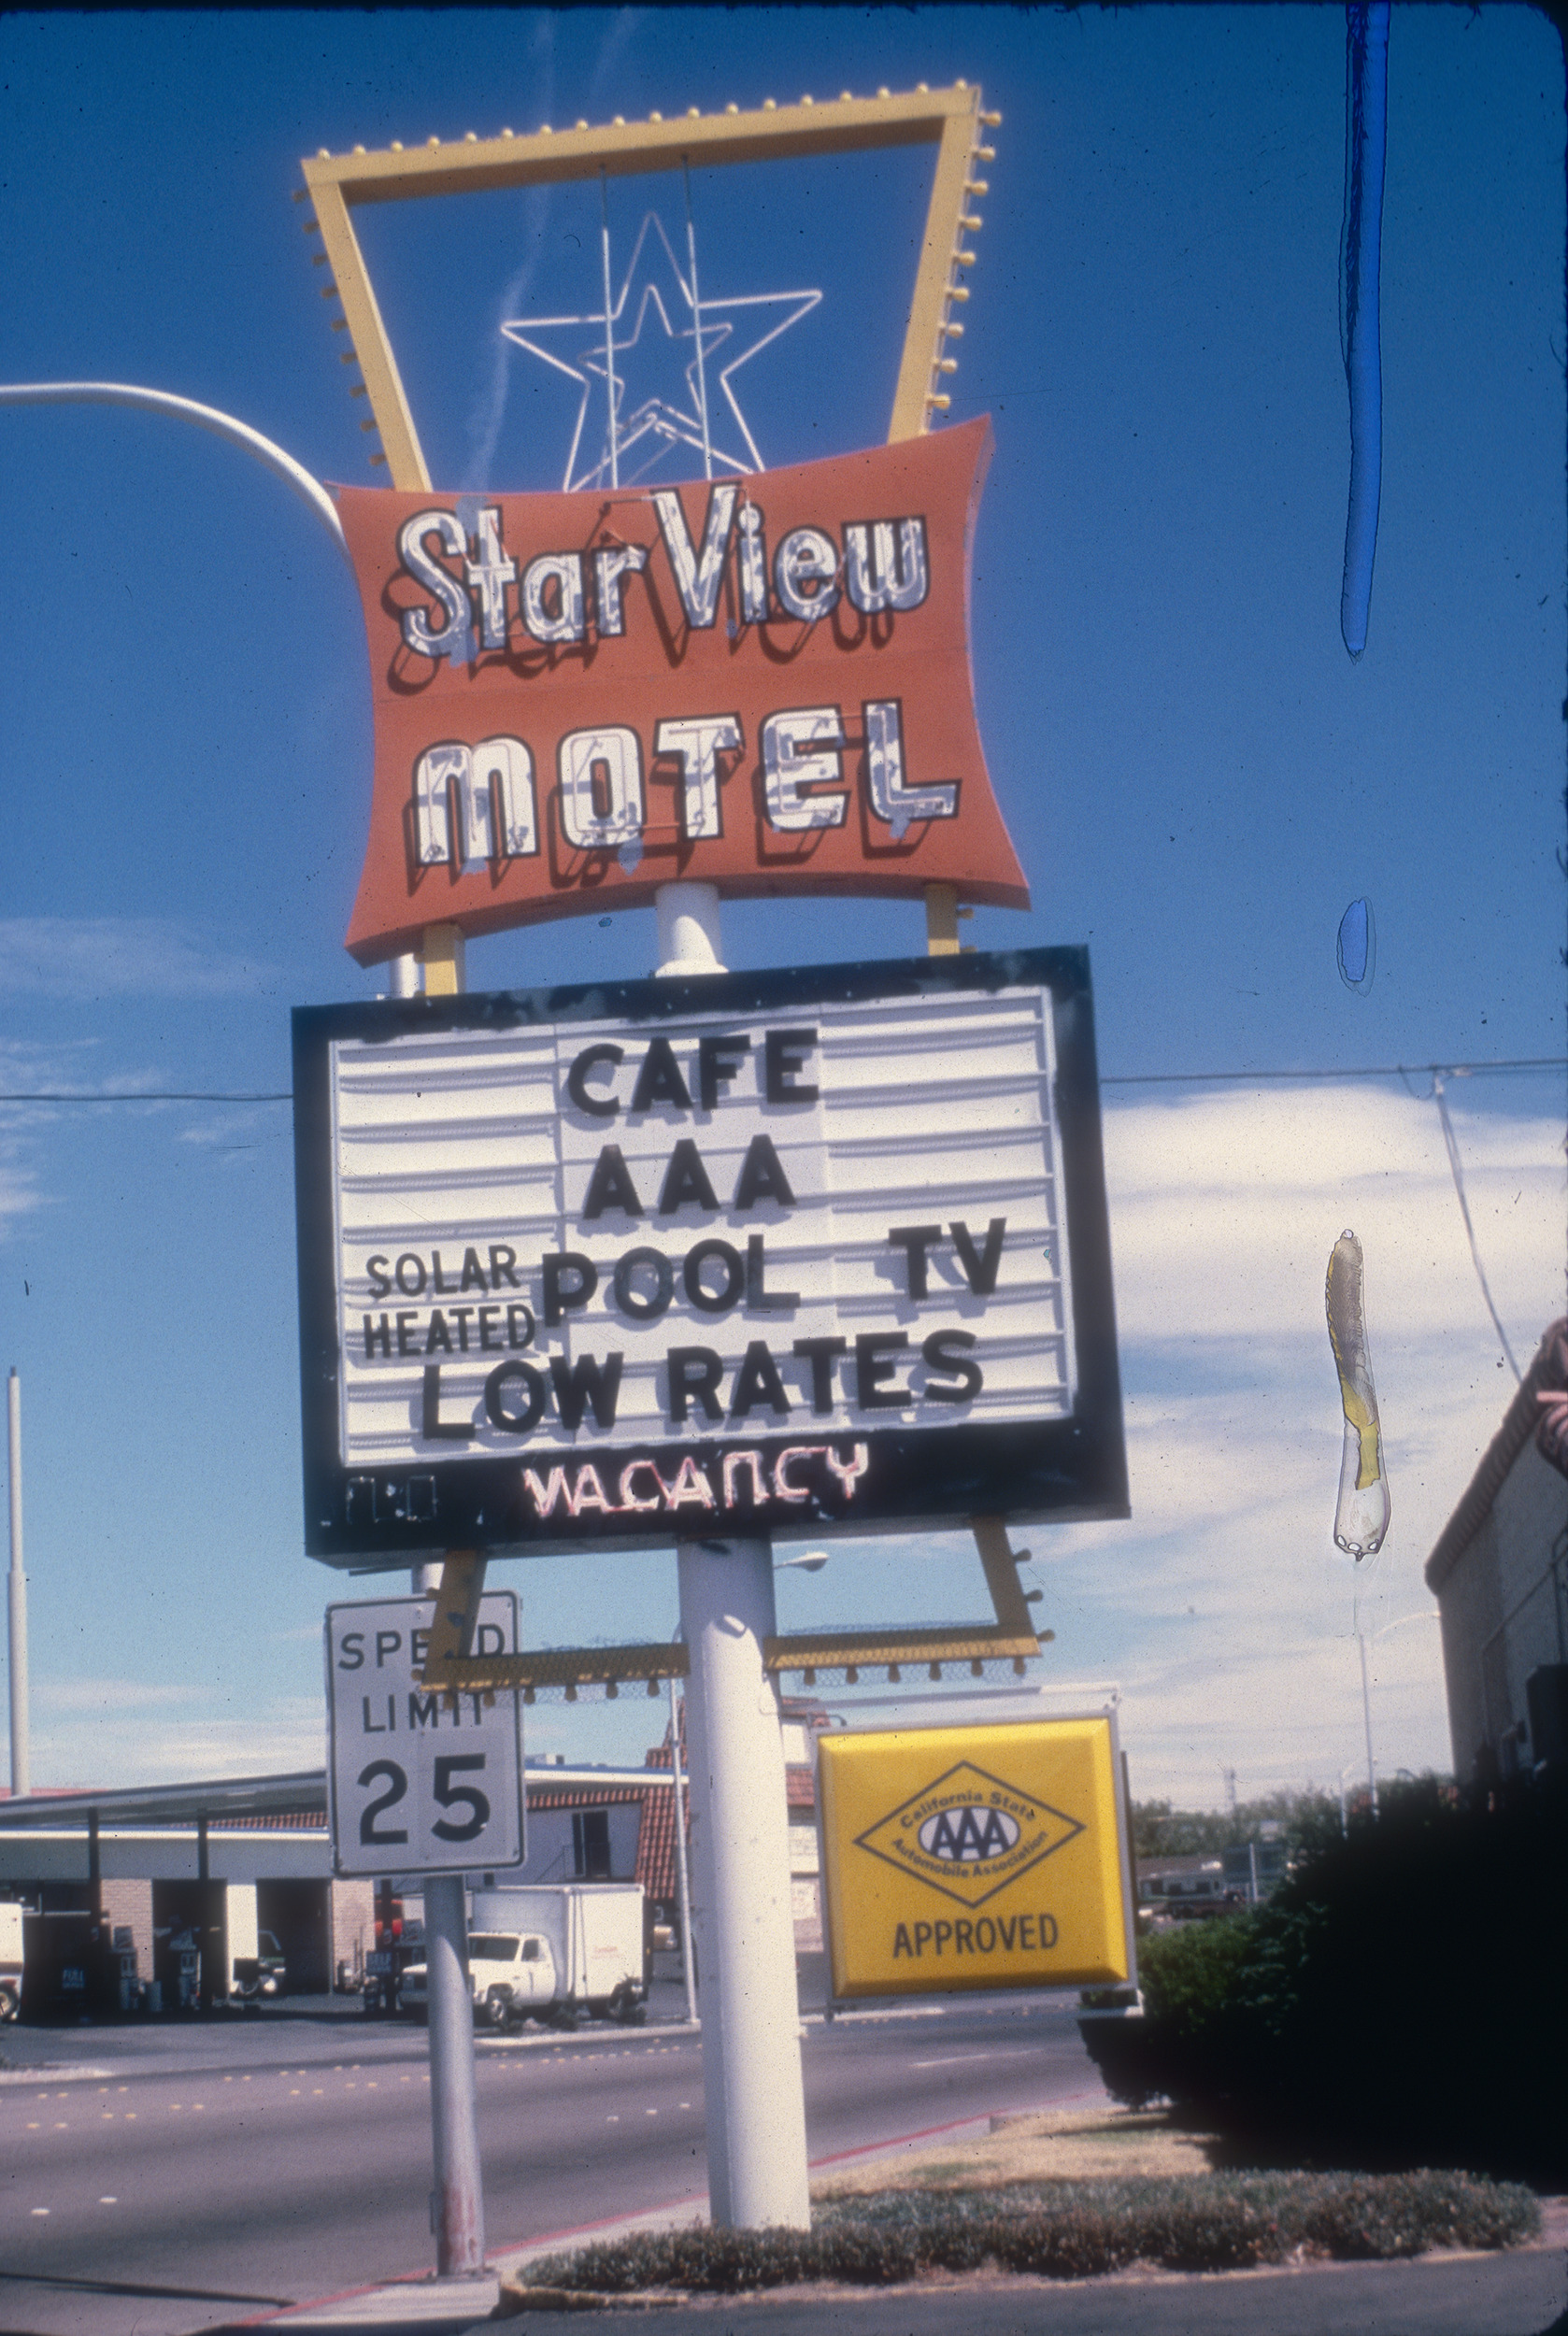 Slide of the neon sign for the Star View Motel, Boulder City, Nevada, 1986